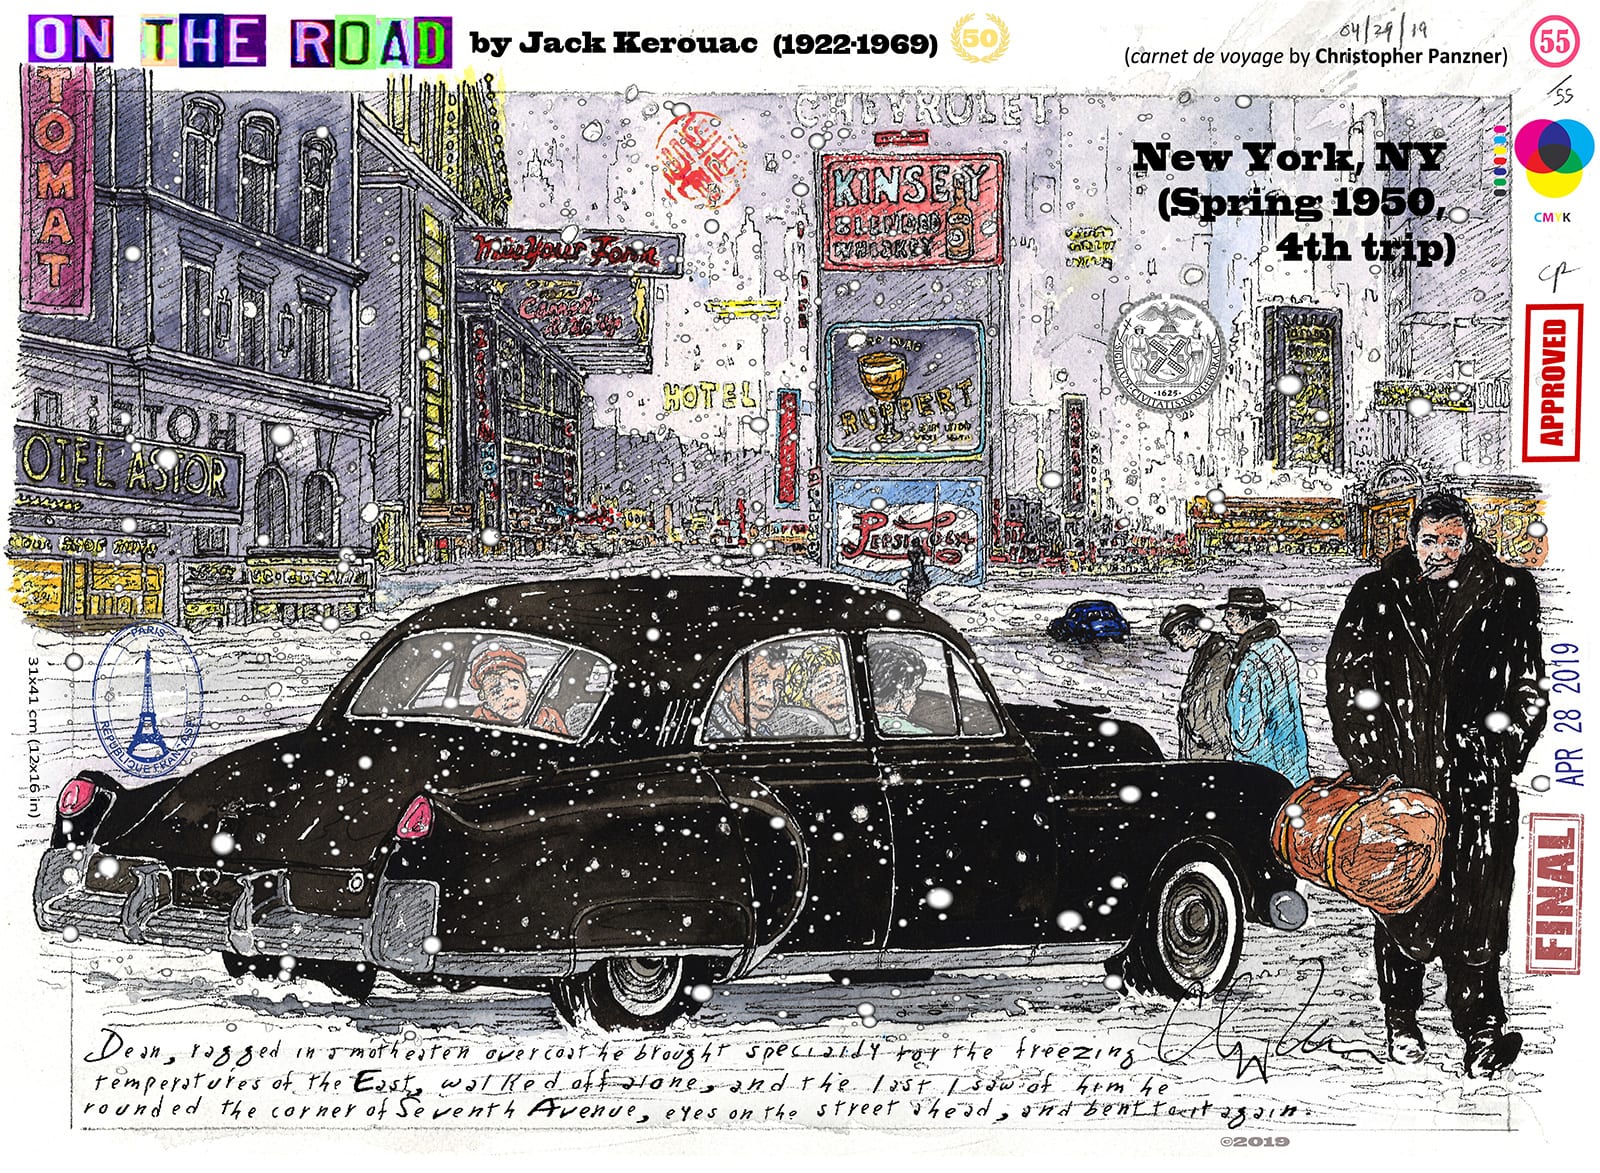 The-Illustrated-On-the-Road-(OTR-#55)-for-jackkerouac.com-(C.-Panzner-©-2019)